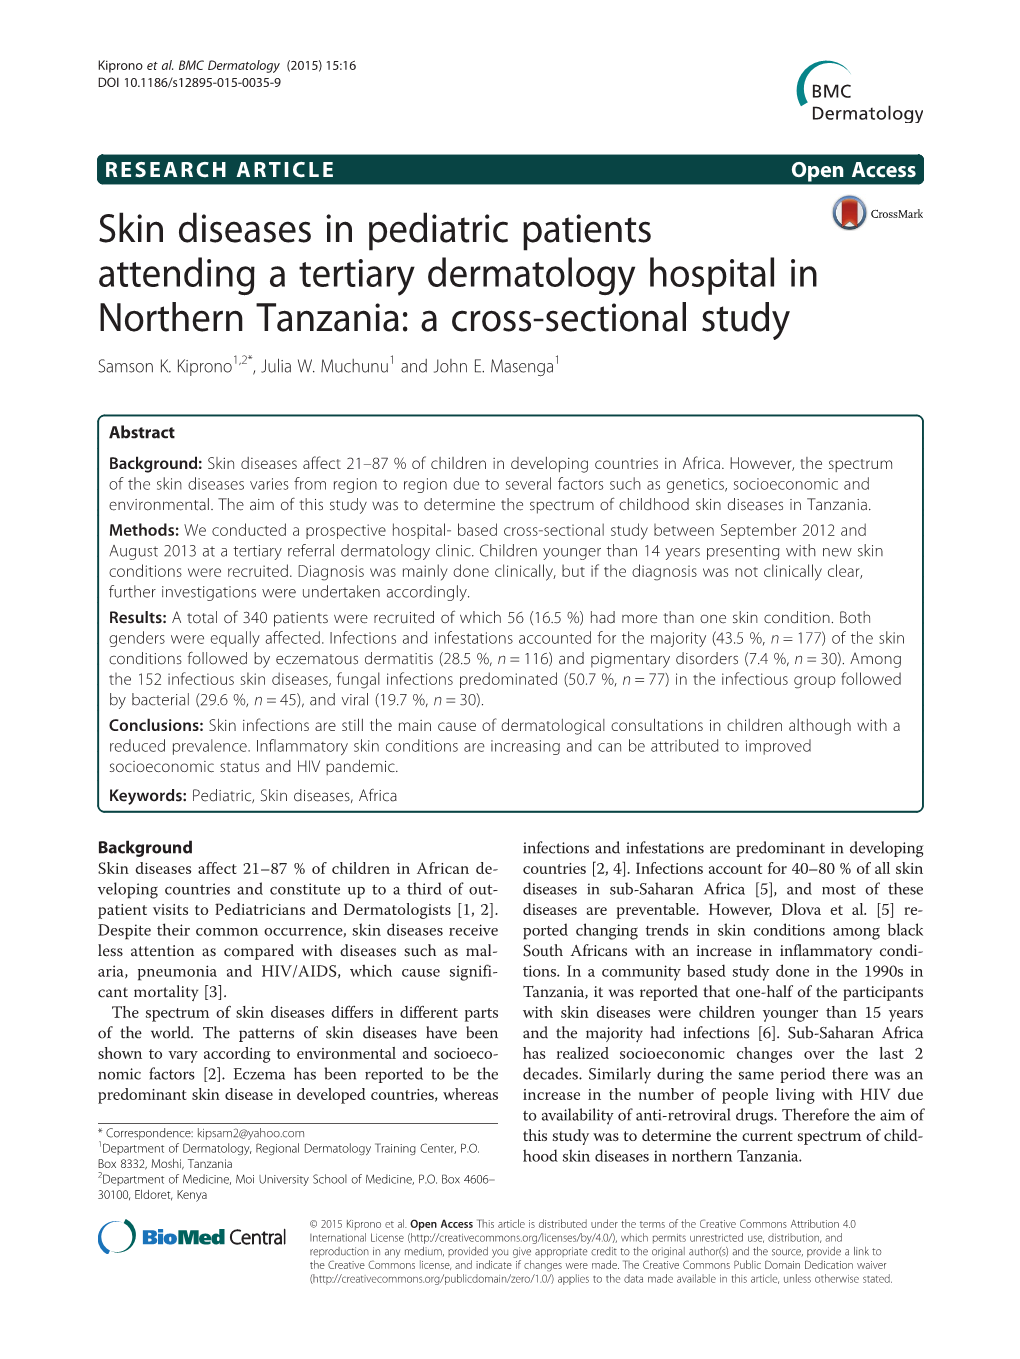 Skin Diseases in Pediatric Patients Attending a Tertiary Dermatology Hospital in Northern Tanzania: a Cross-Sectional Study Samson K